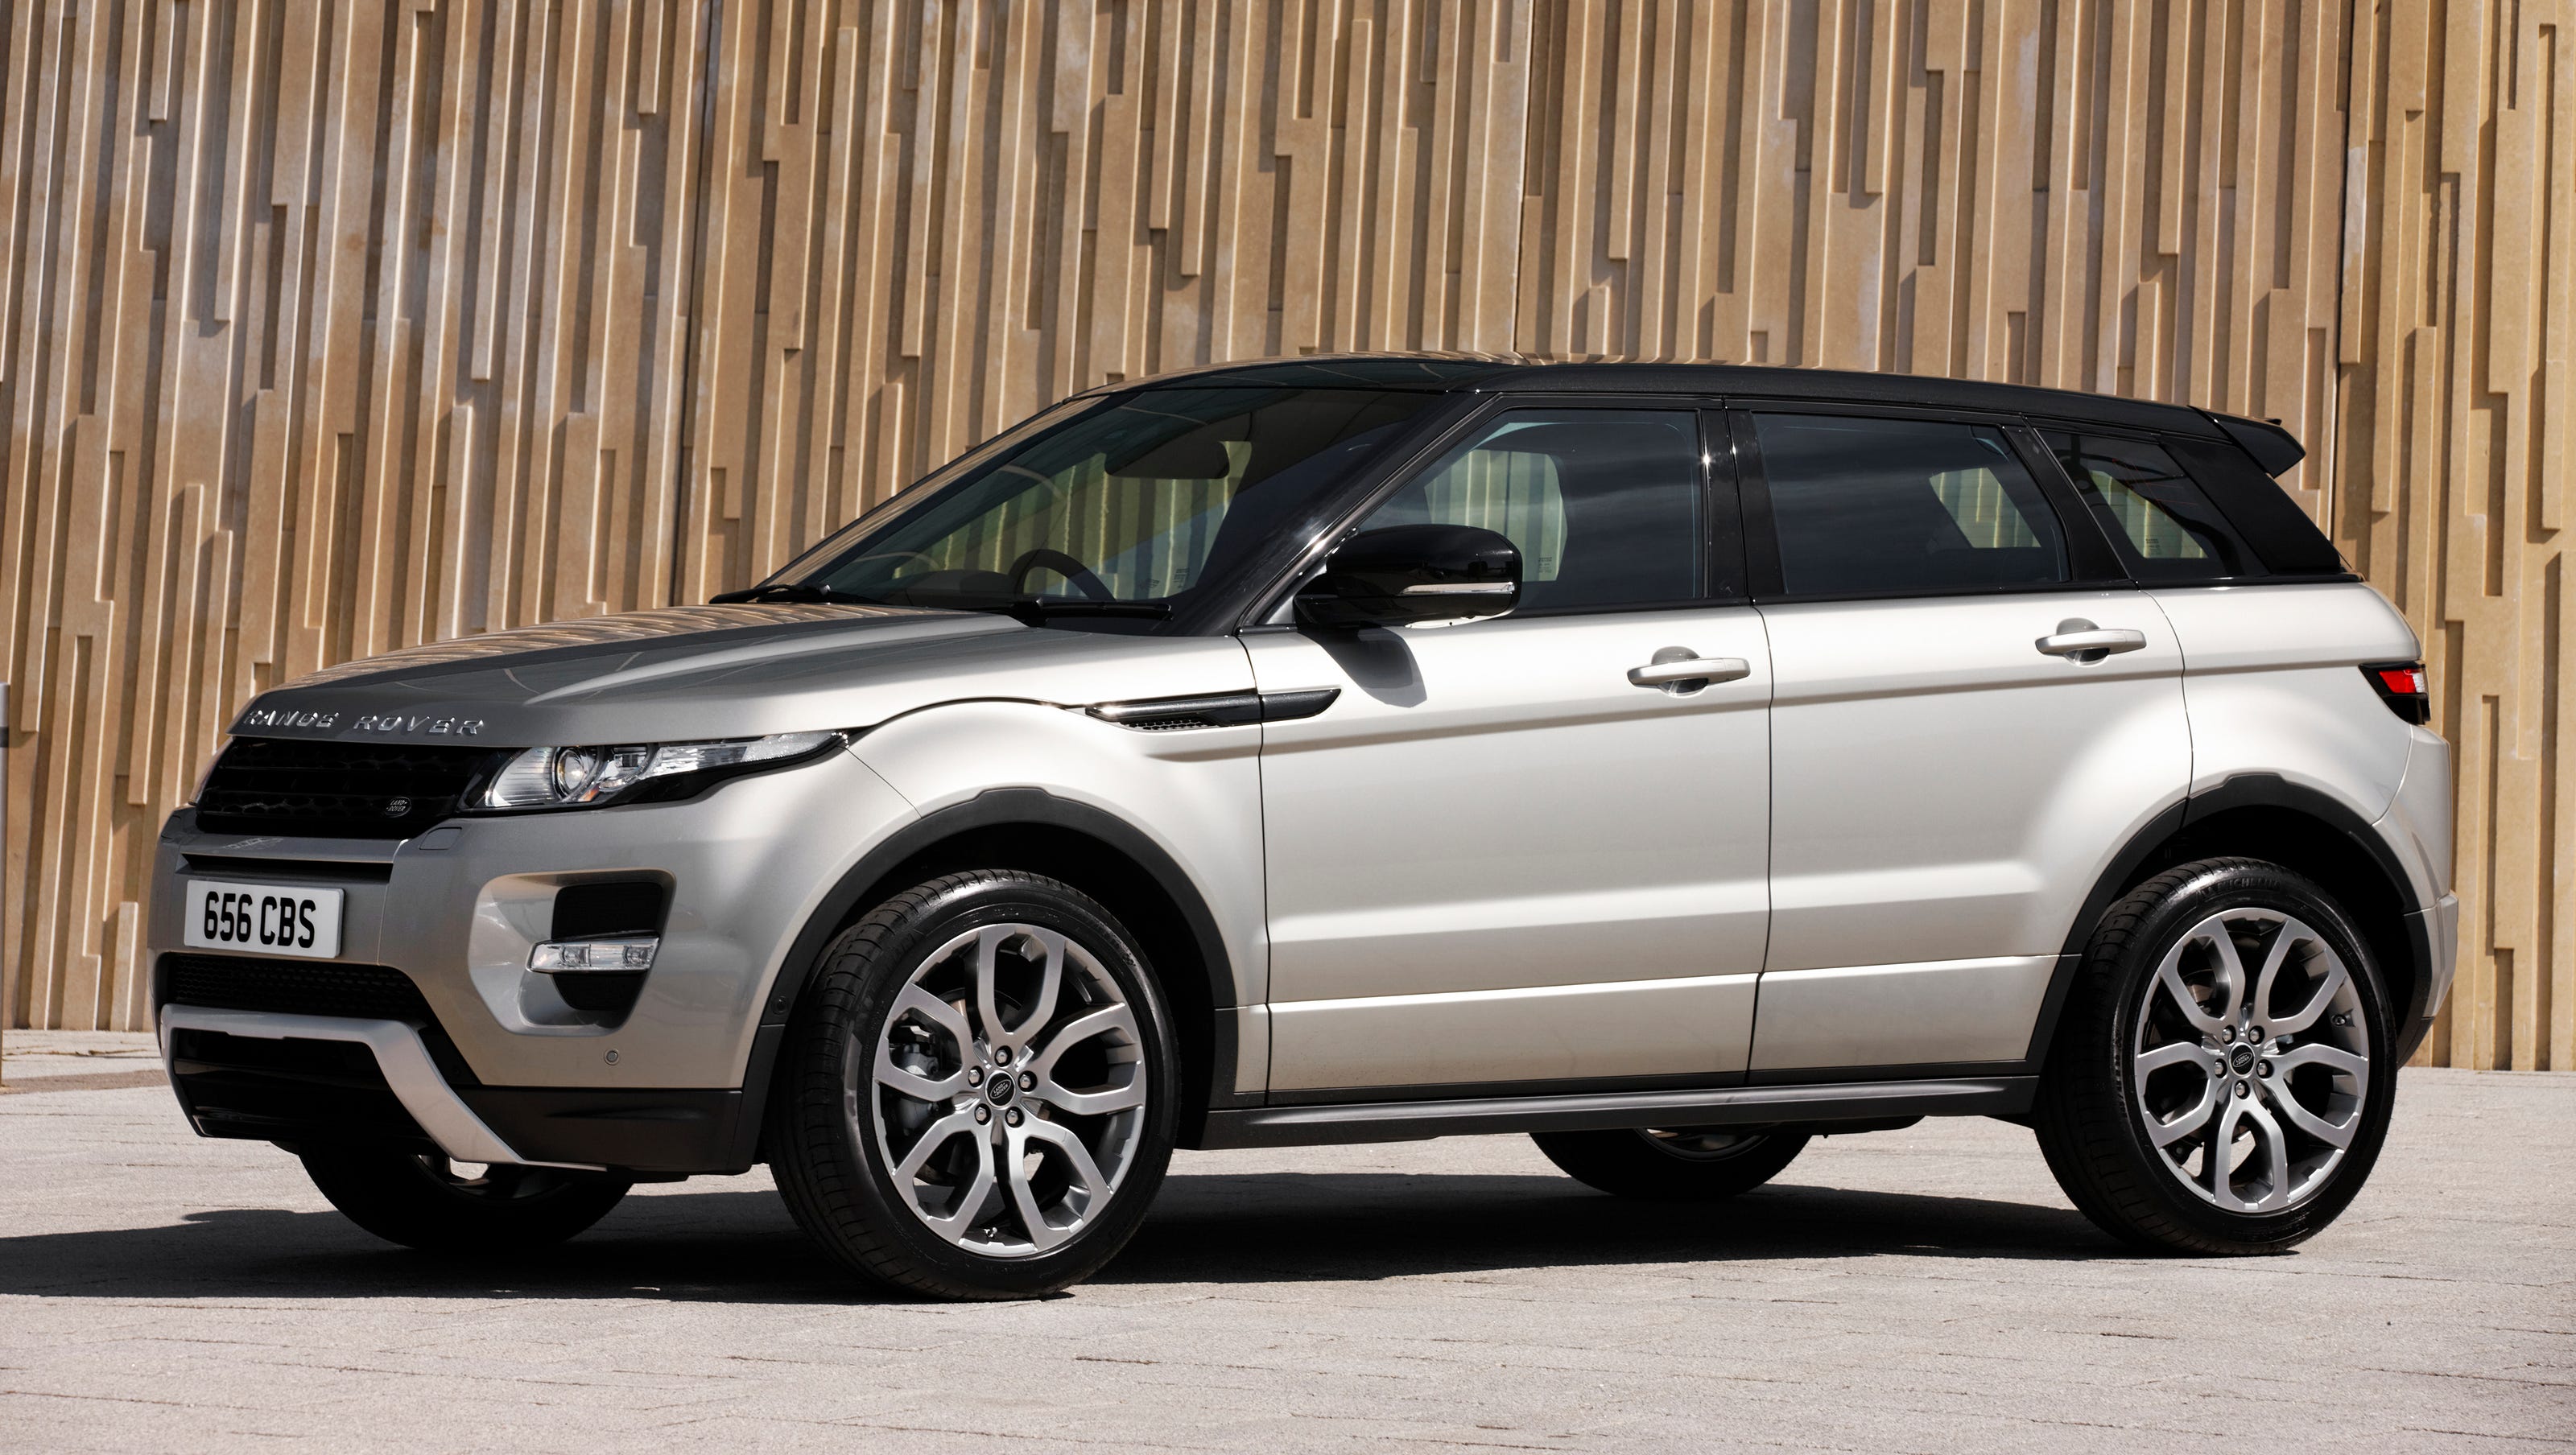 Auto review: Range Rover Evoque is well-behaved on drive to French Lick Concours d'Elegance